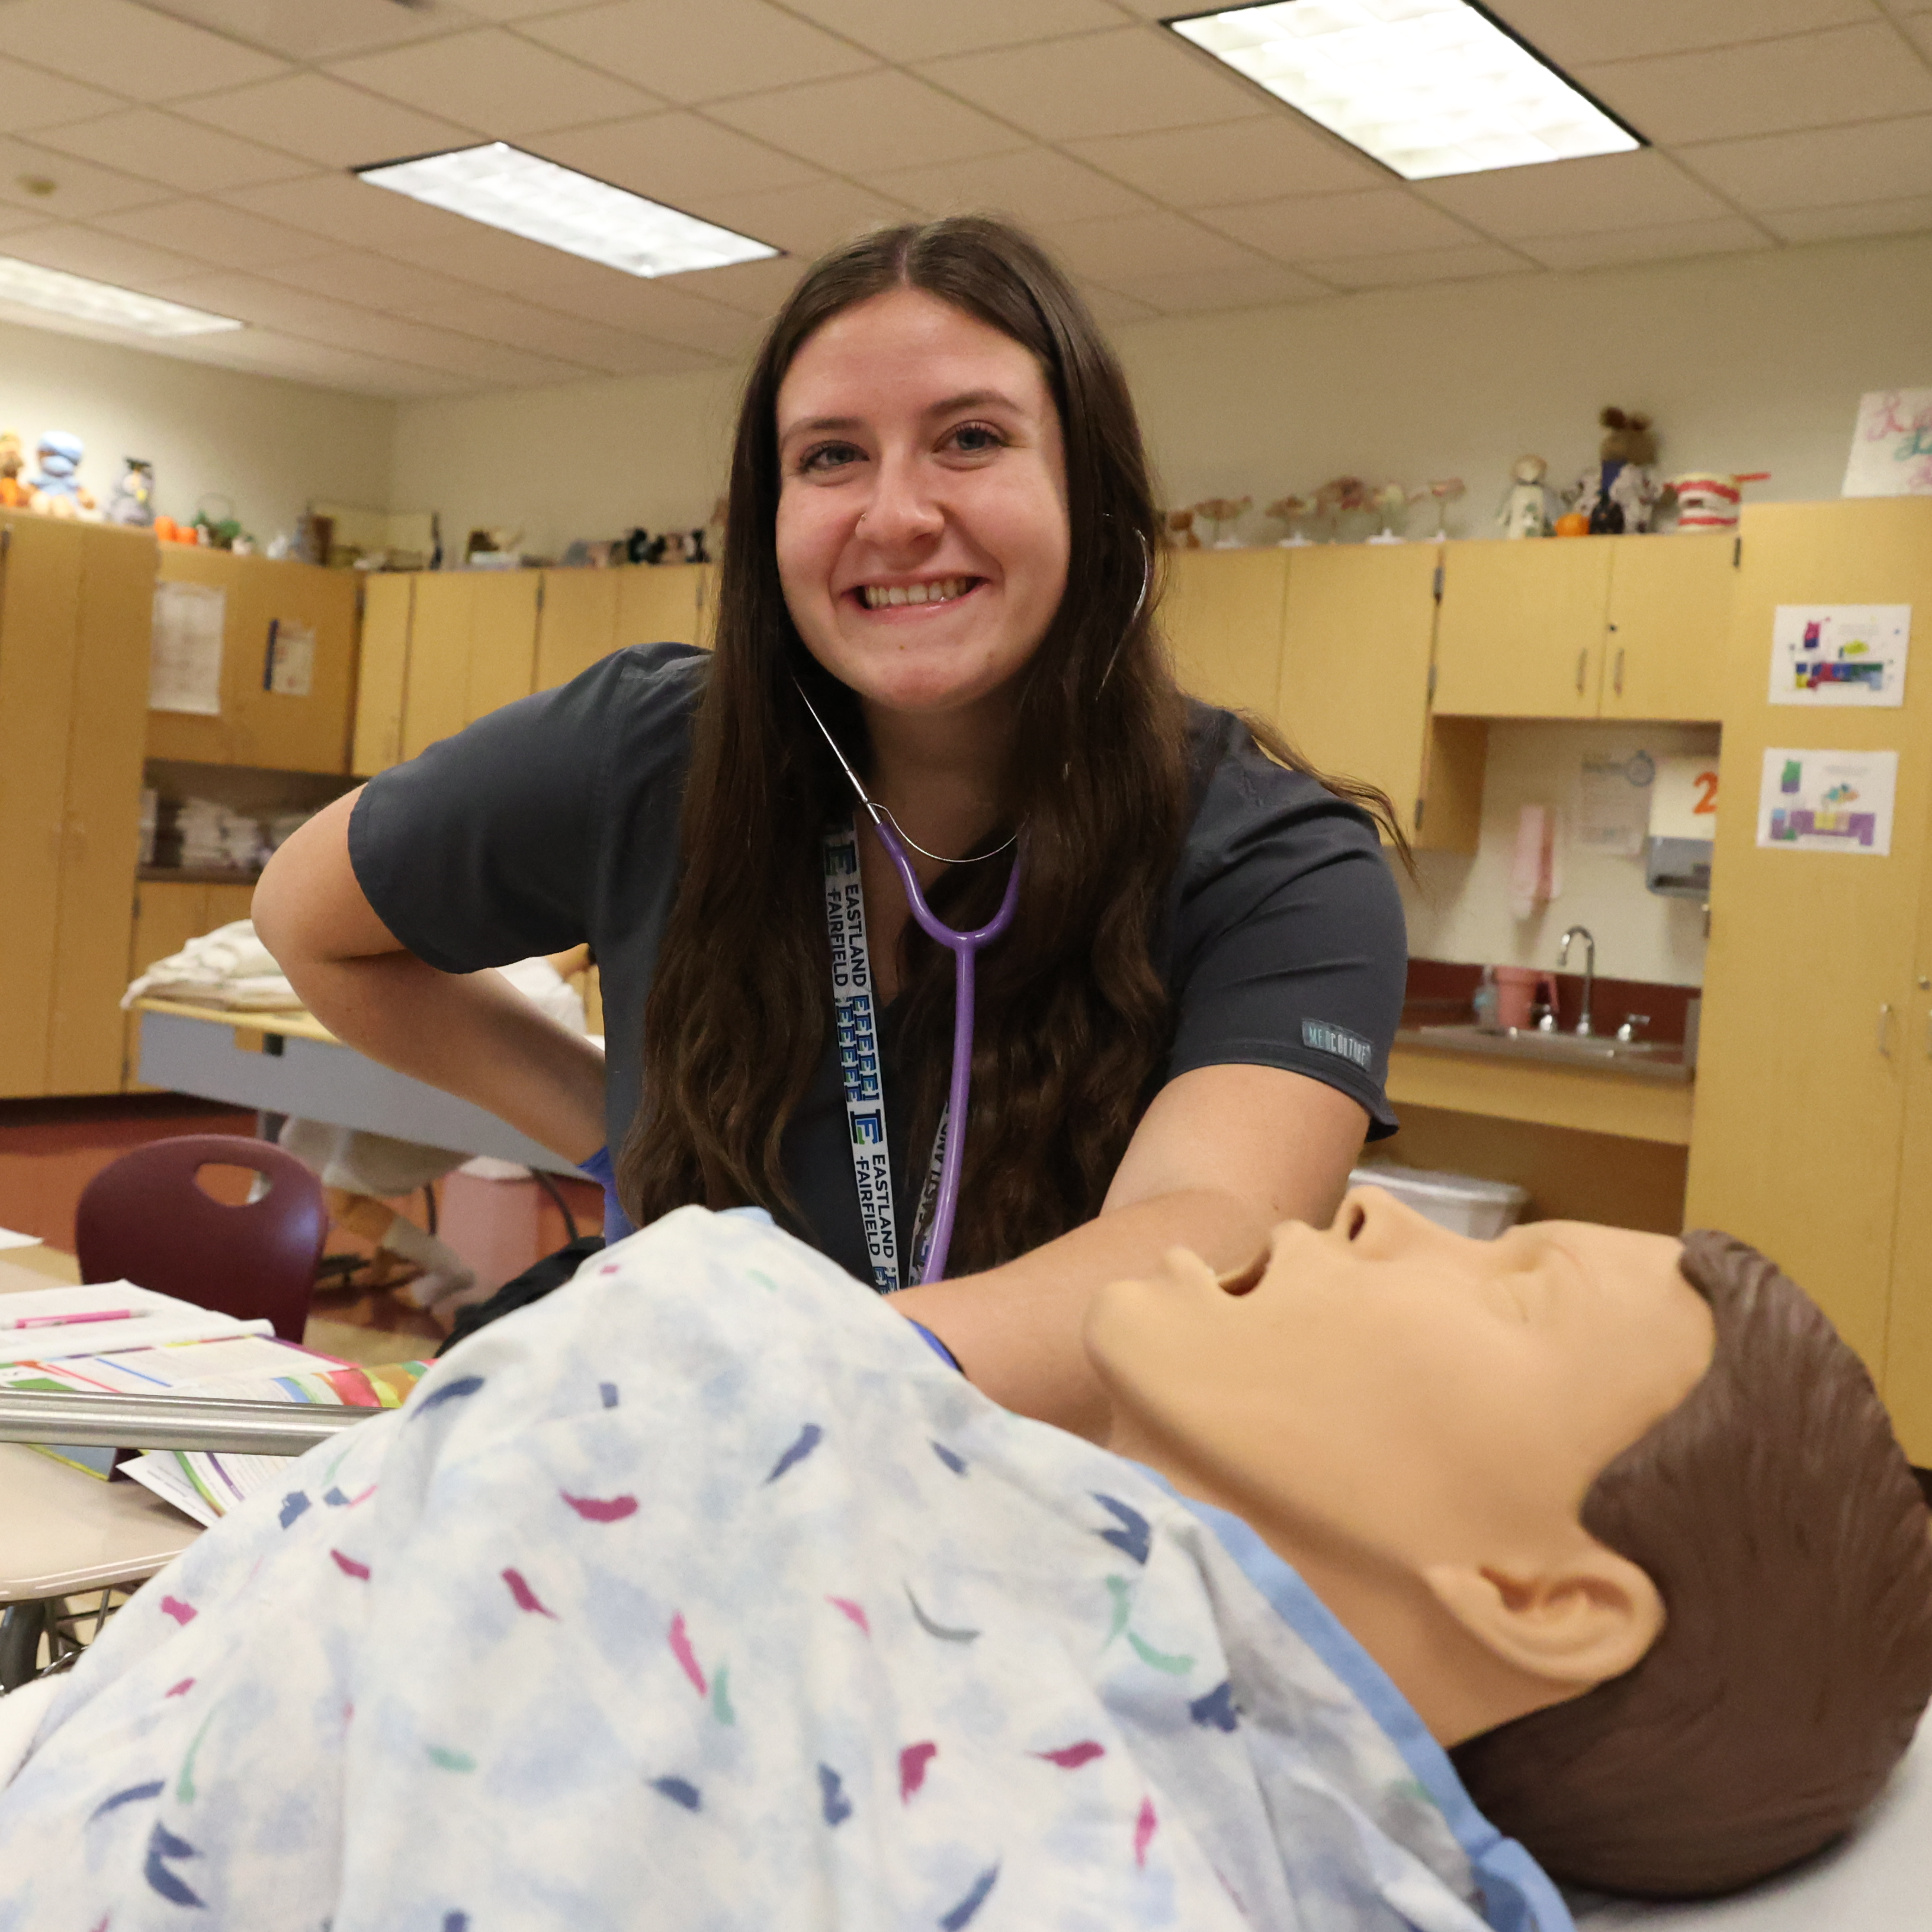 A White, female student is using a stethoscope to practice measuring the heartbeat of a patient on a mannequin.